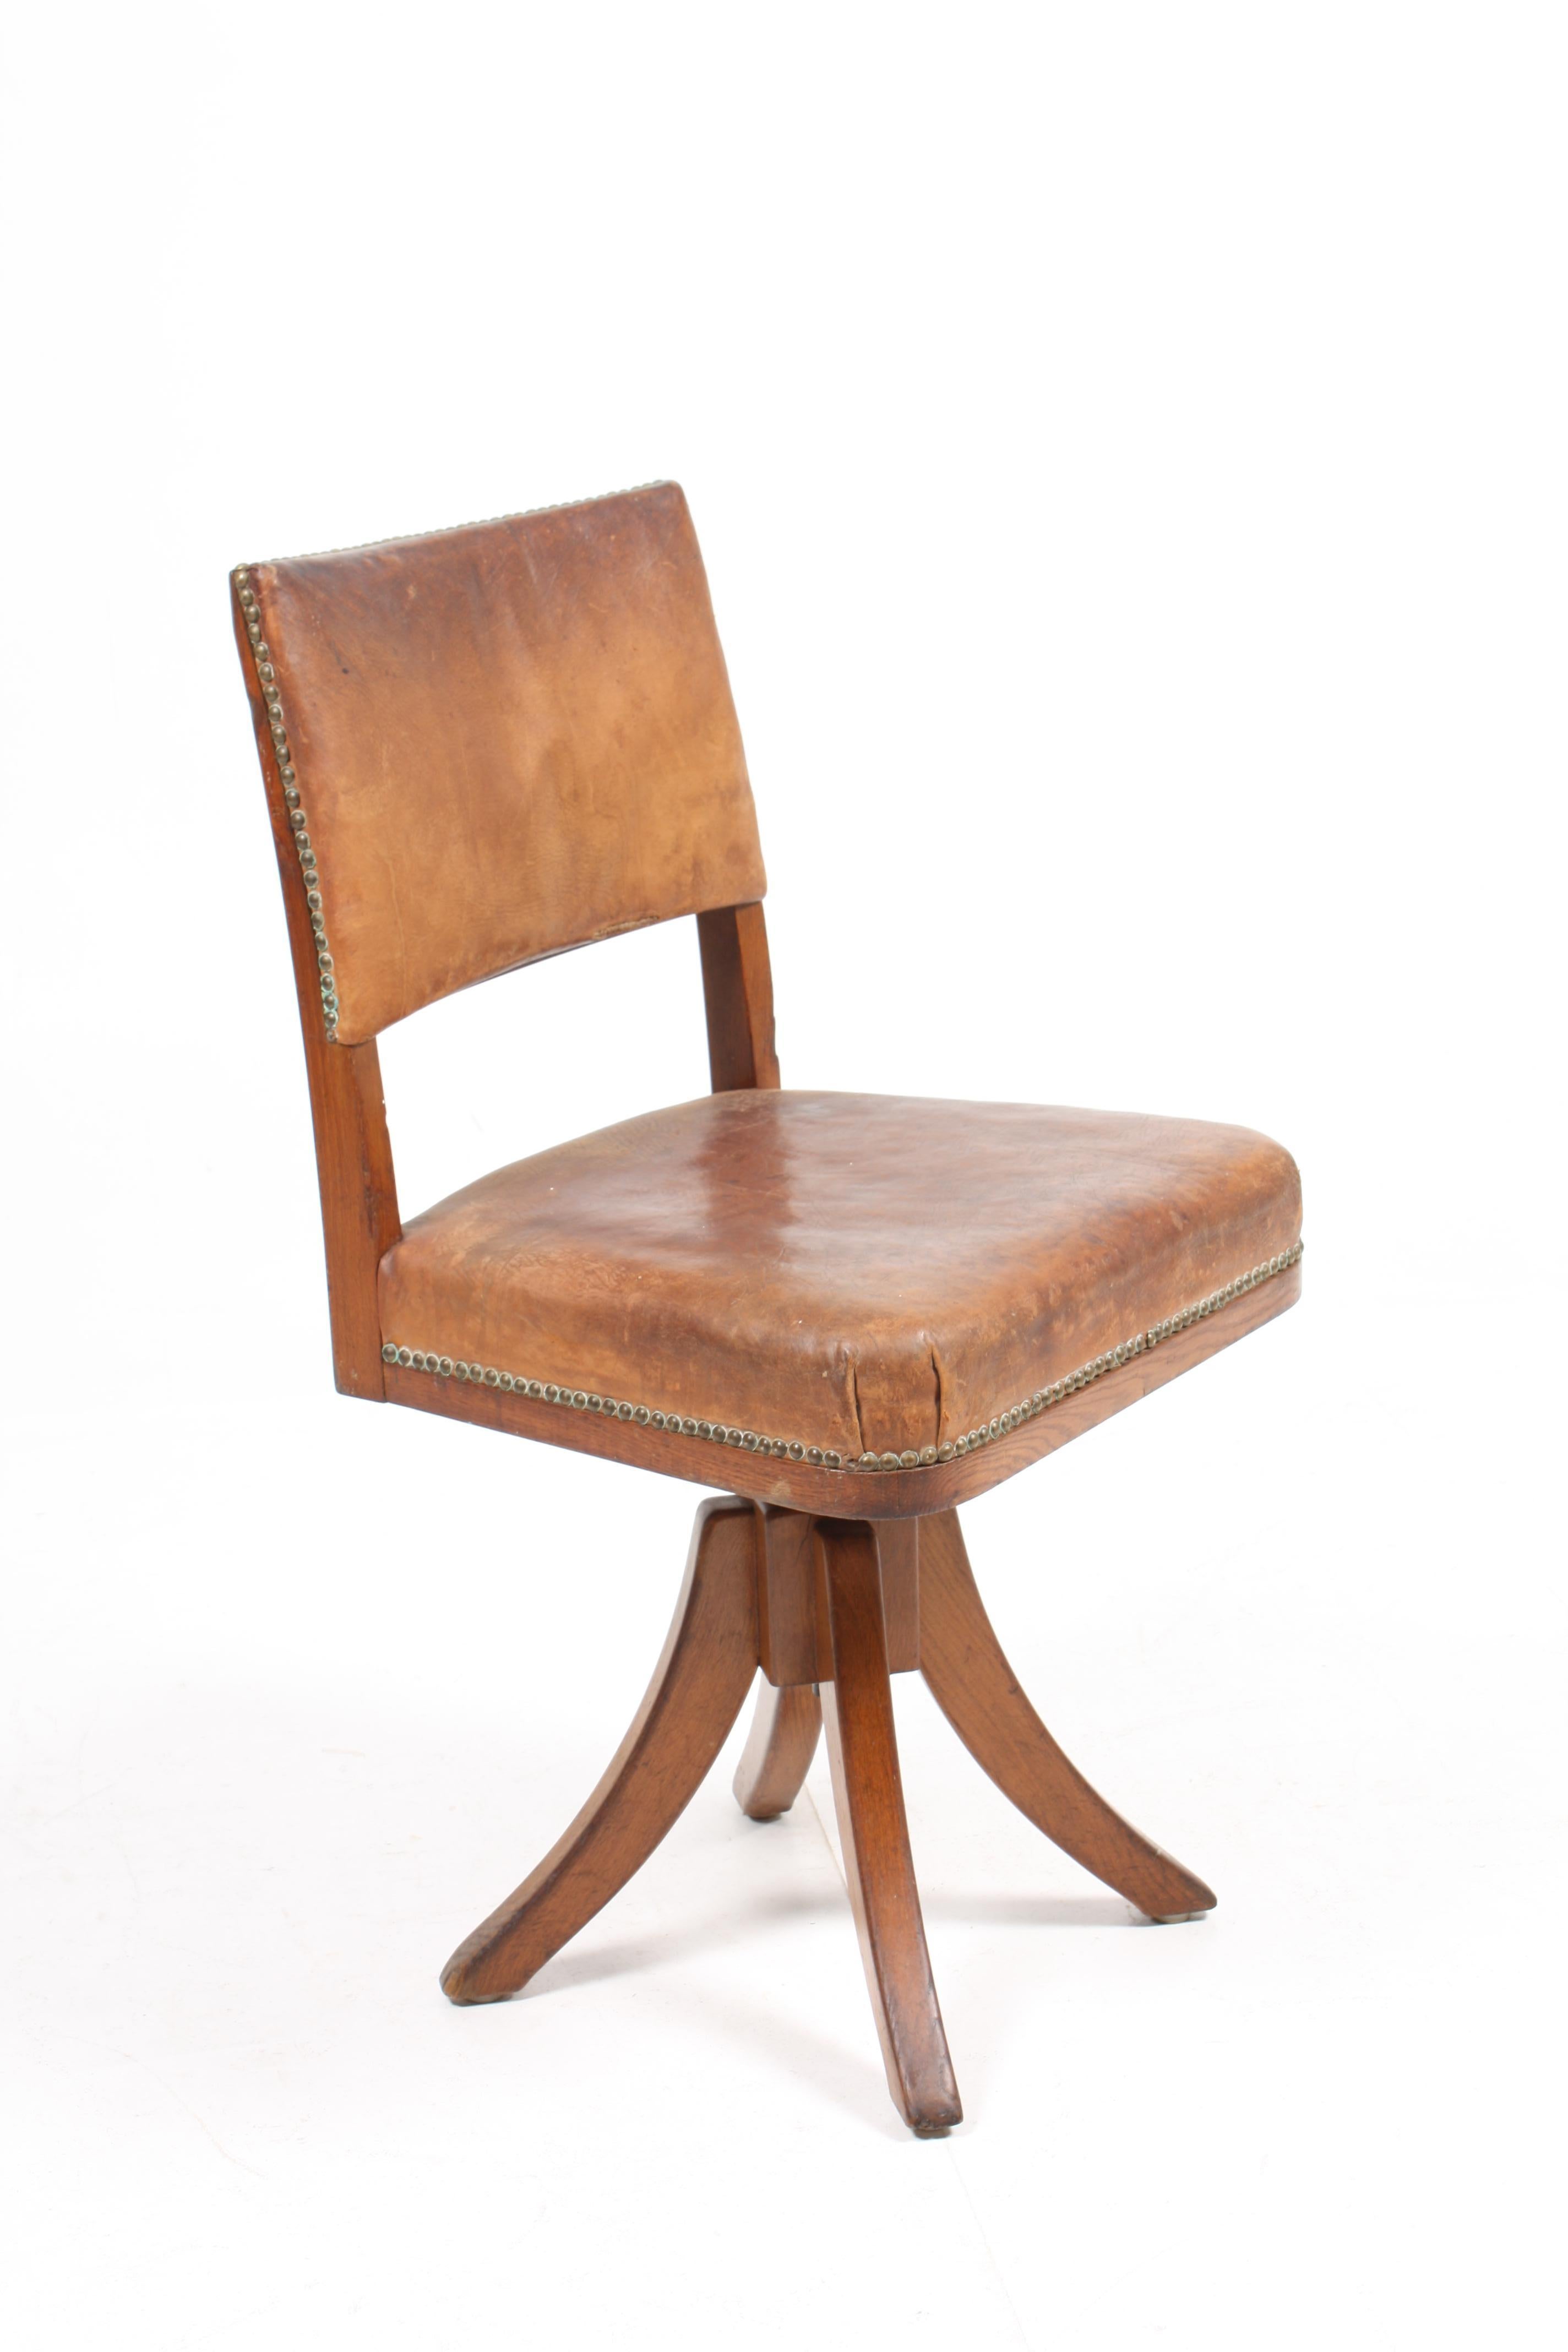 Swivel chair with adjustable height in patinated leather and oak. Designed and made by Frits Henningsen. Made in Denmark, great original condition.